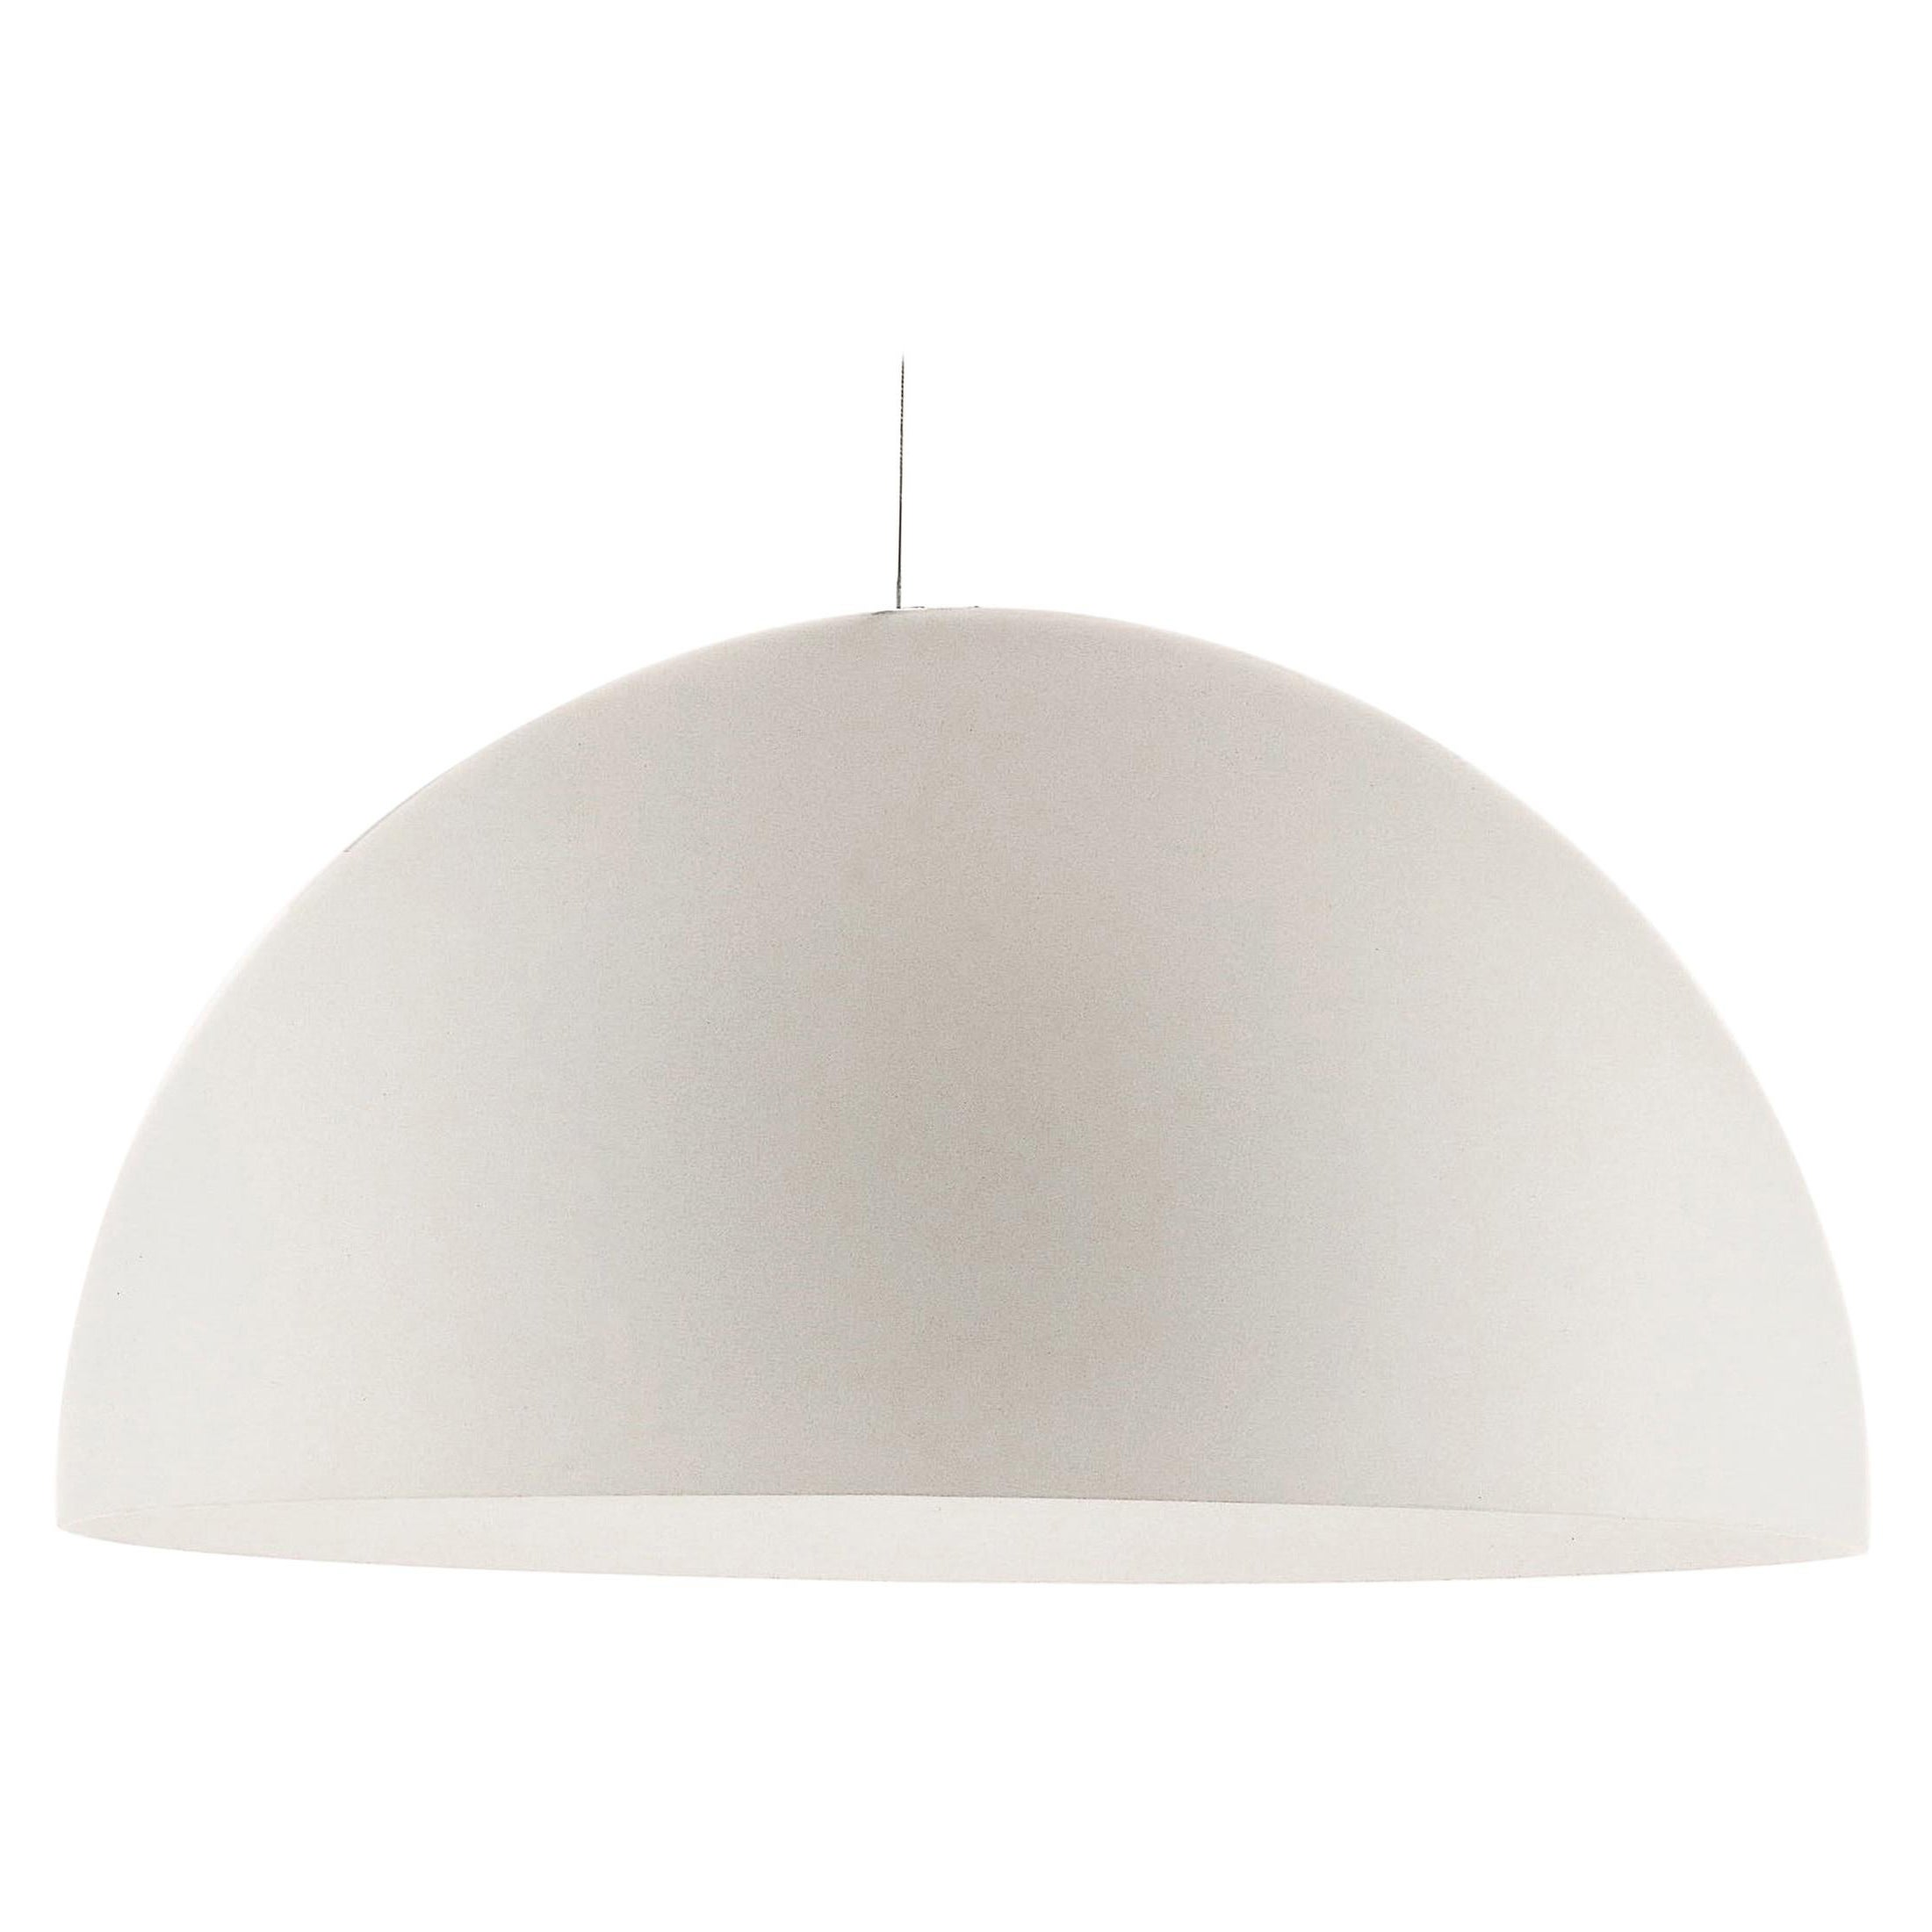 Vico Magistretti Suspension Lamps 'Sonora' Large White Opaline Glass by Oluce For Sale